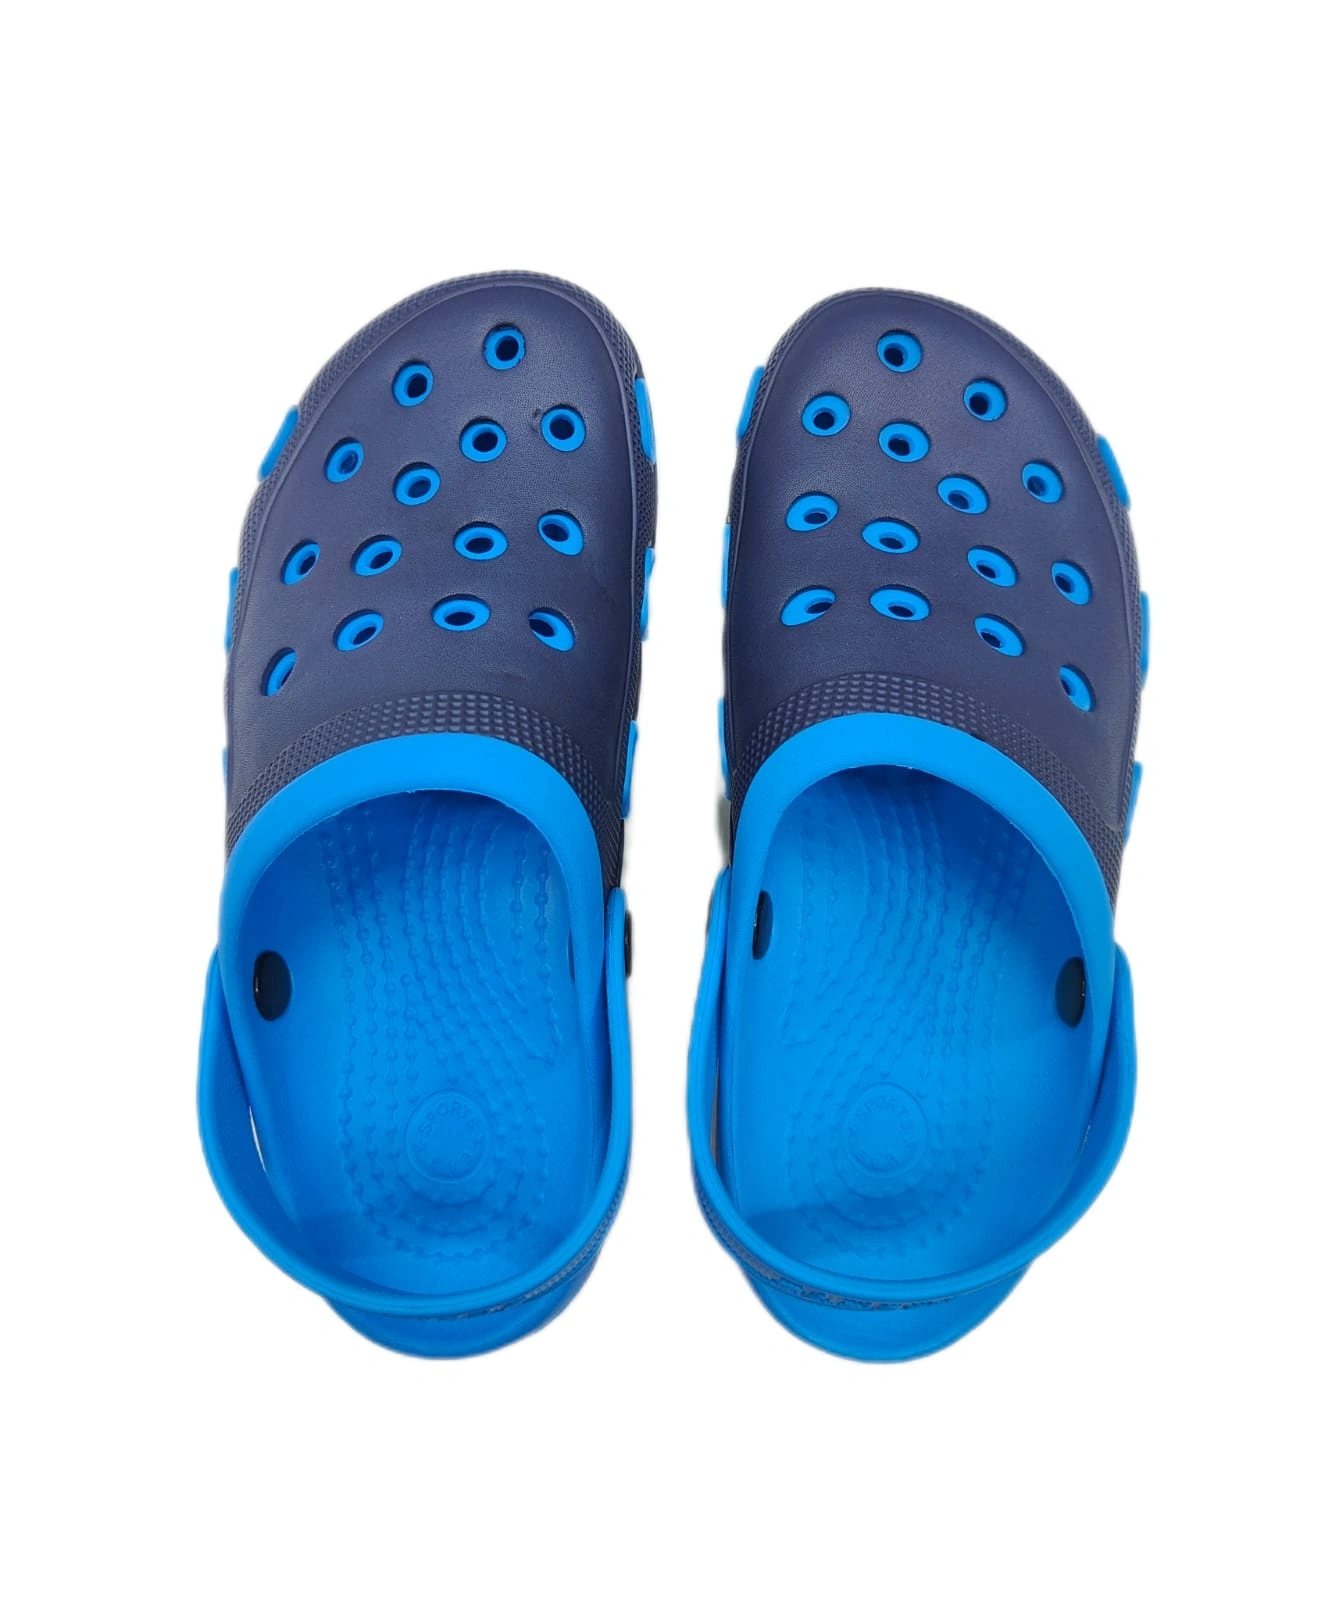 Clog Sandals for Men and Women: Comfortable, Lightweight Design with Durable Upper and Slip-Resistant Outsole for All-Day Wear-615636966823